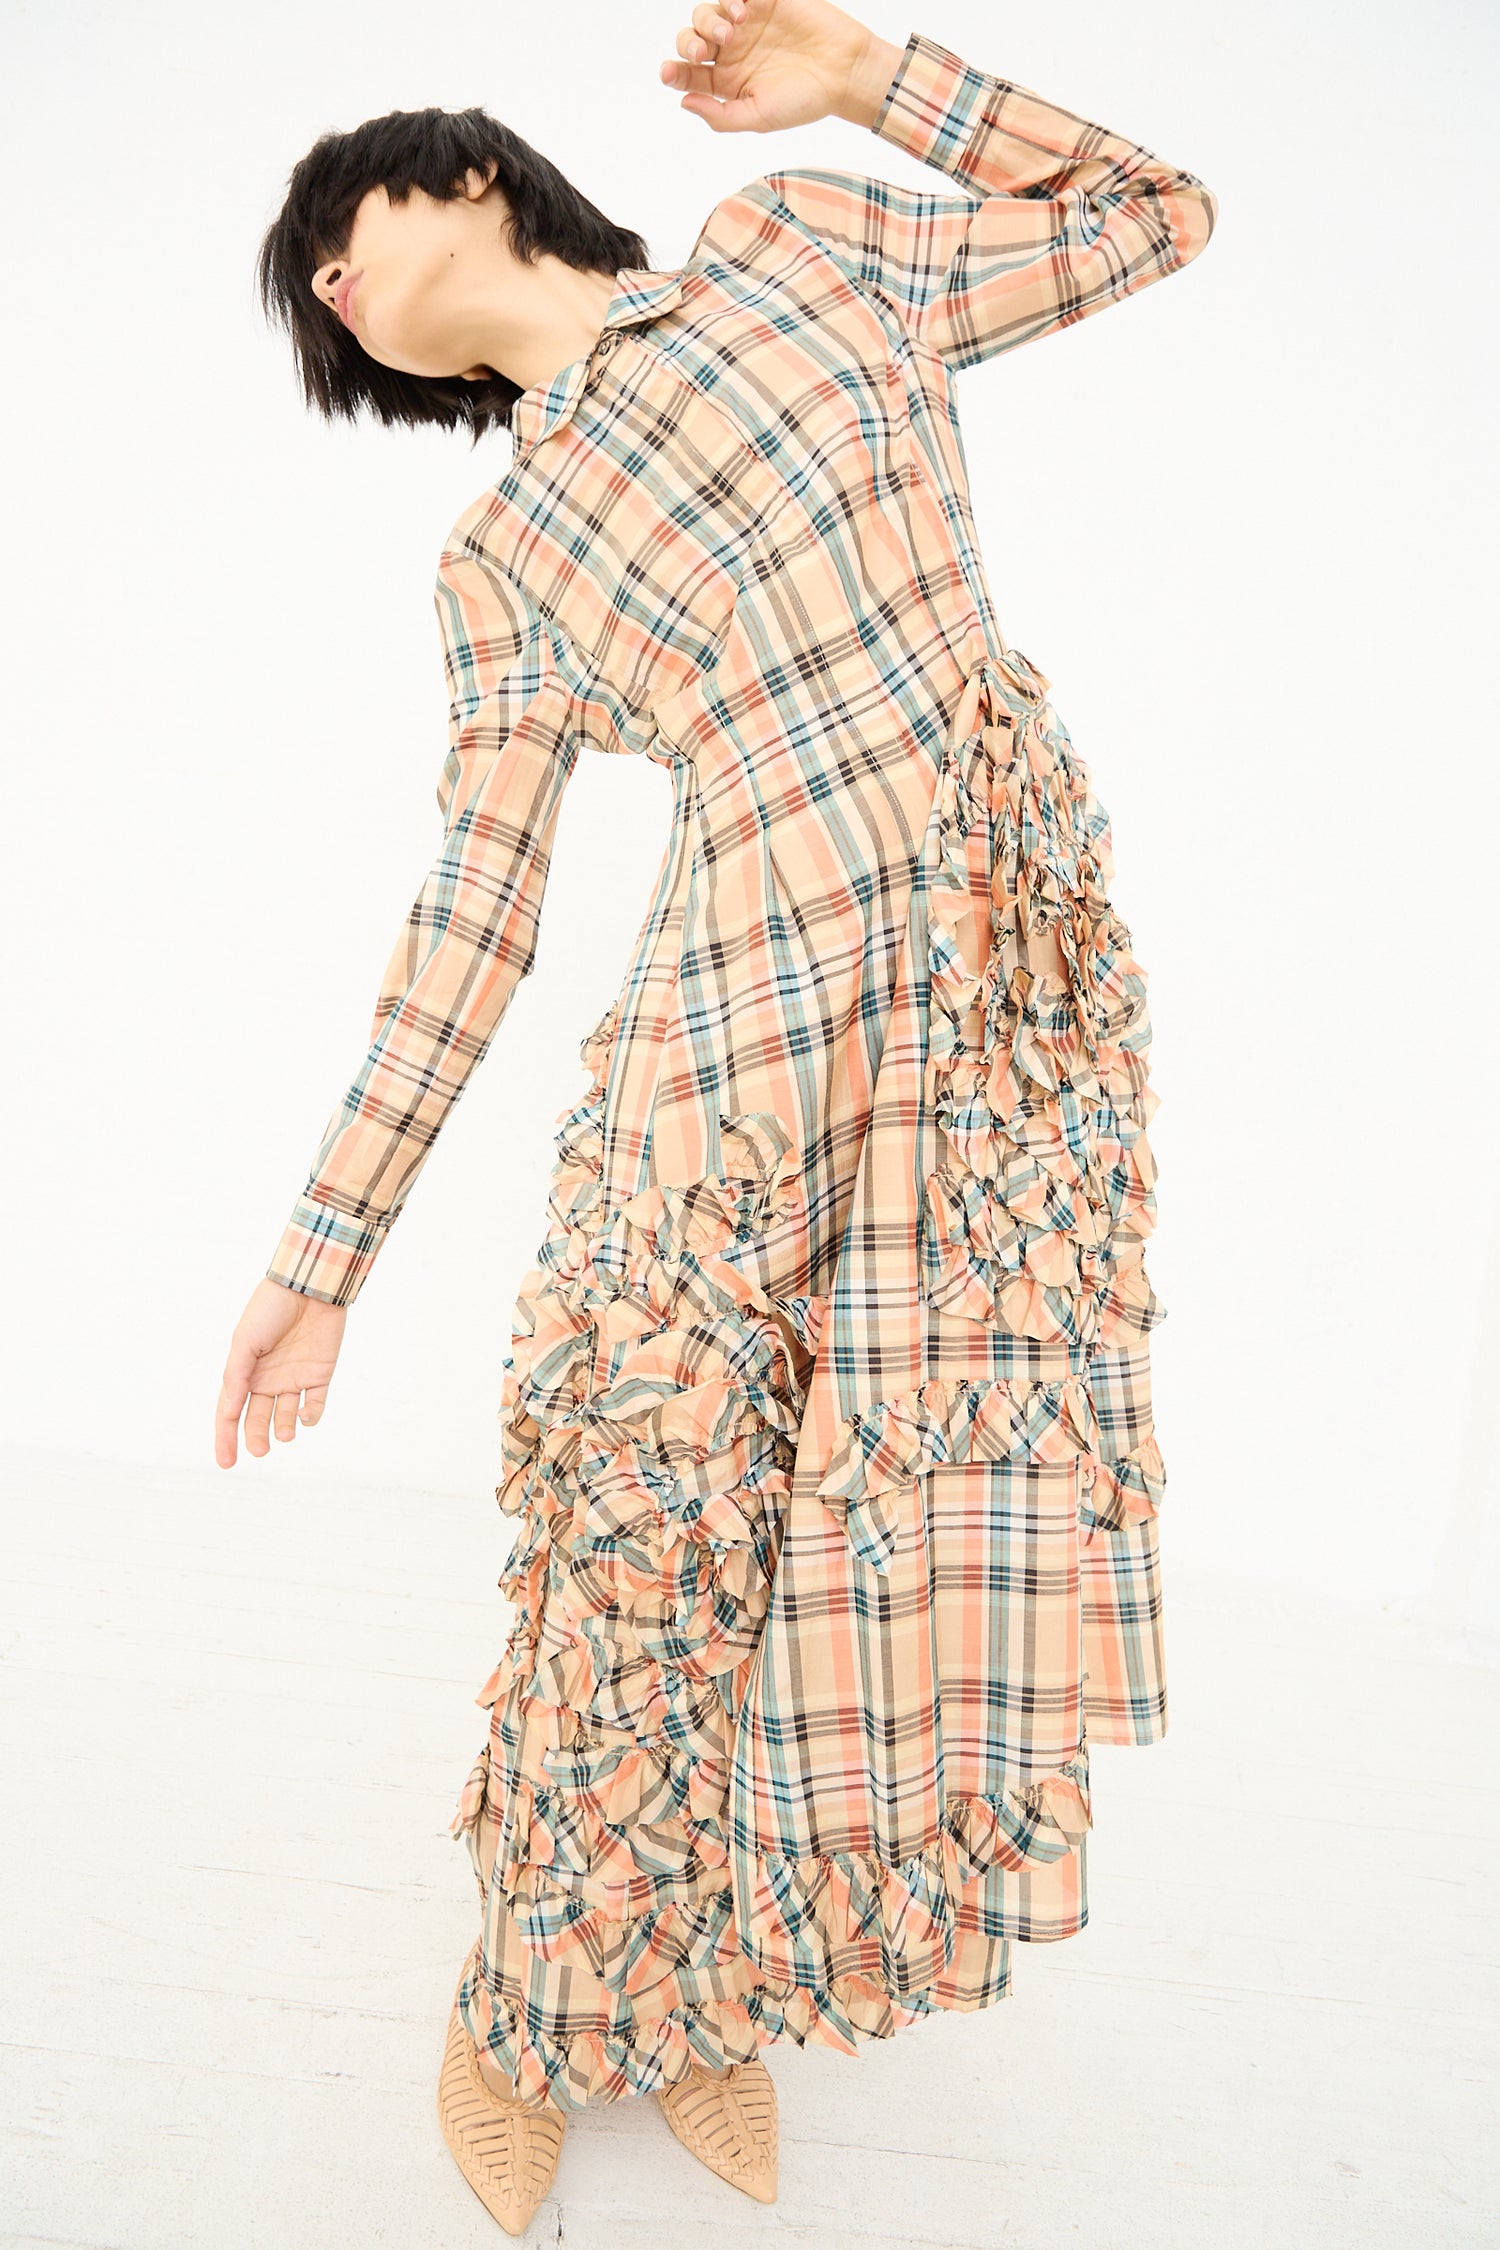 A person in a Ulla Johnson Gwen Dress in Meadow, a plaid maxi shirt dress with ruffle details, mid-motion with head tilted back and arm extended.